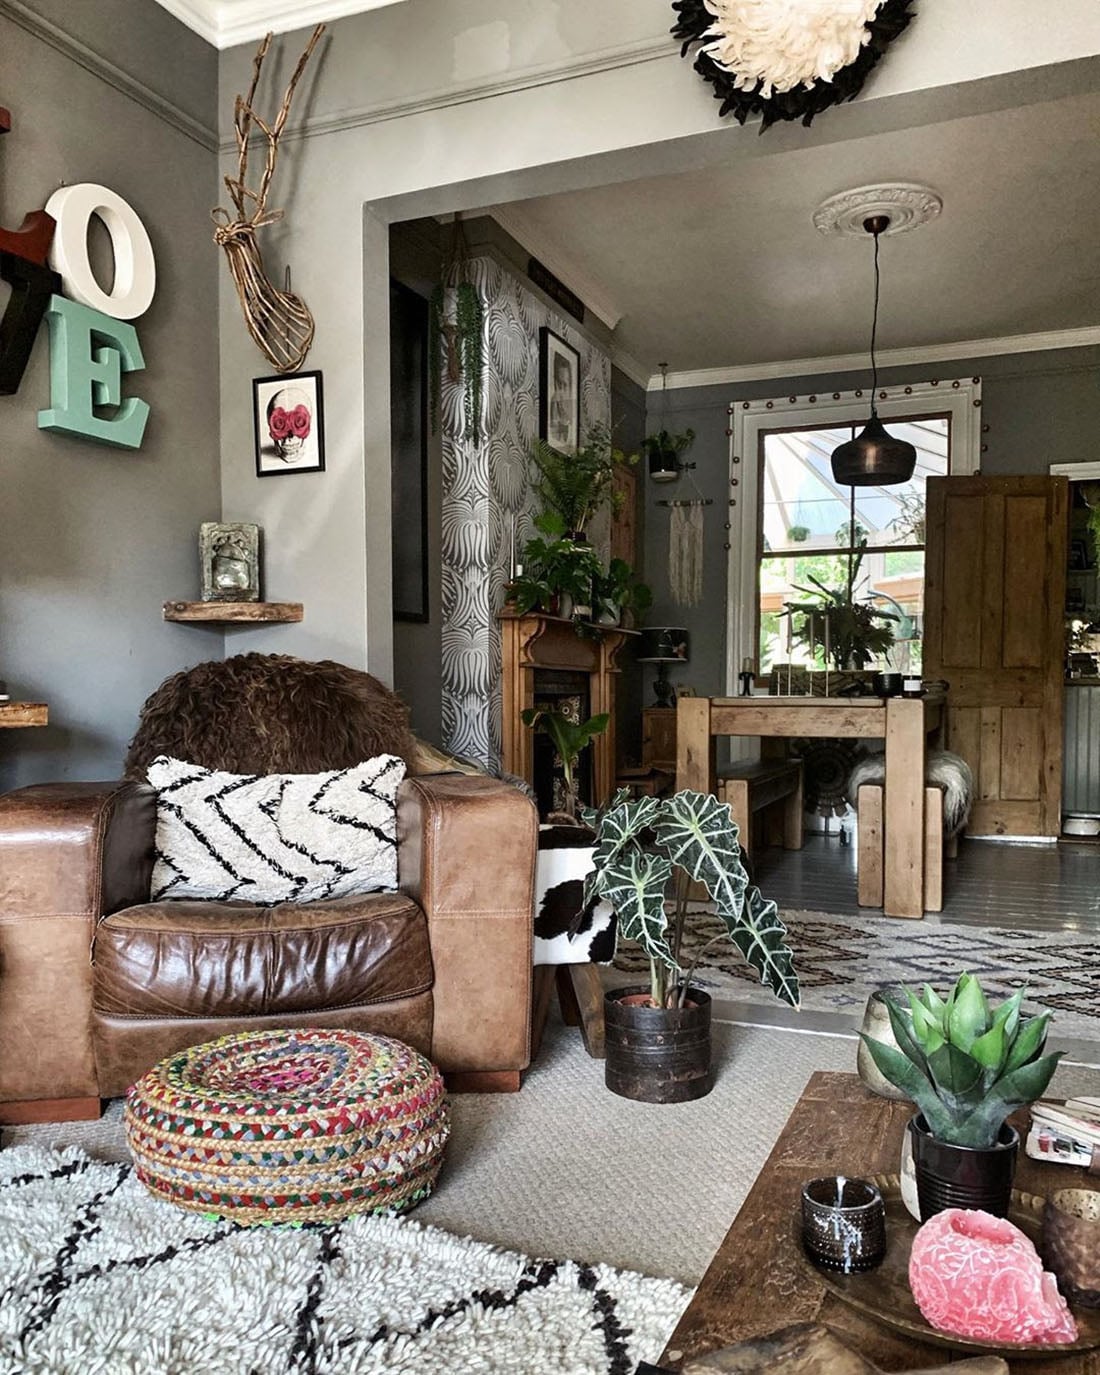 Eclectic eclectic boho decor ideas for a maximalist bohemian look